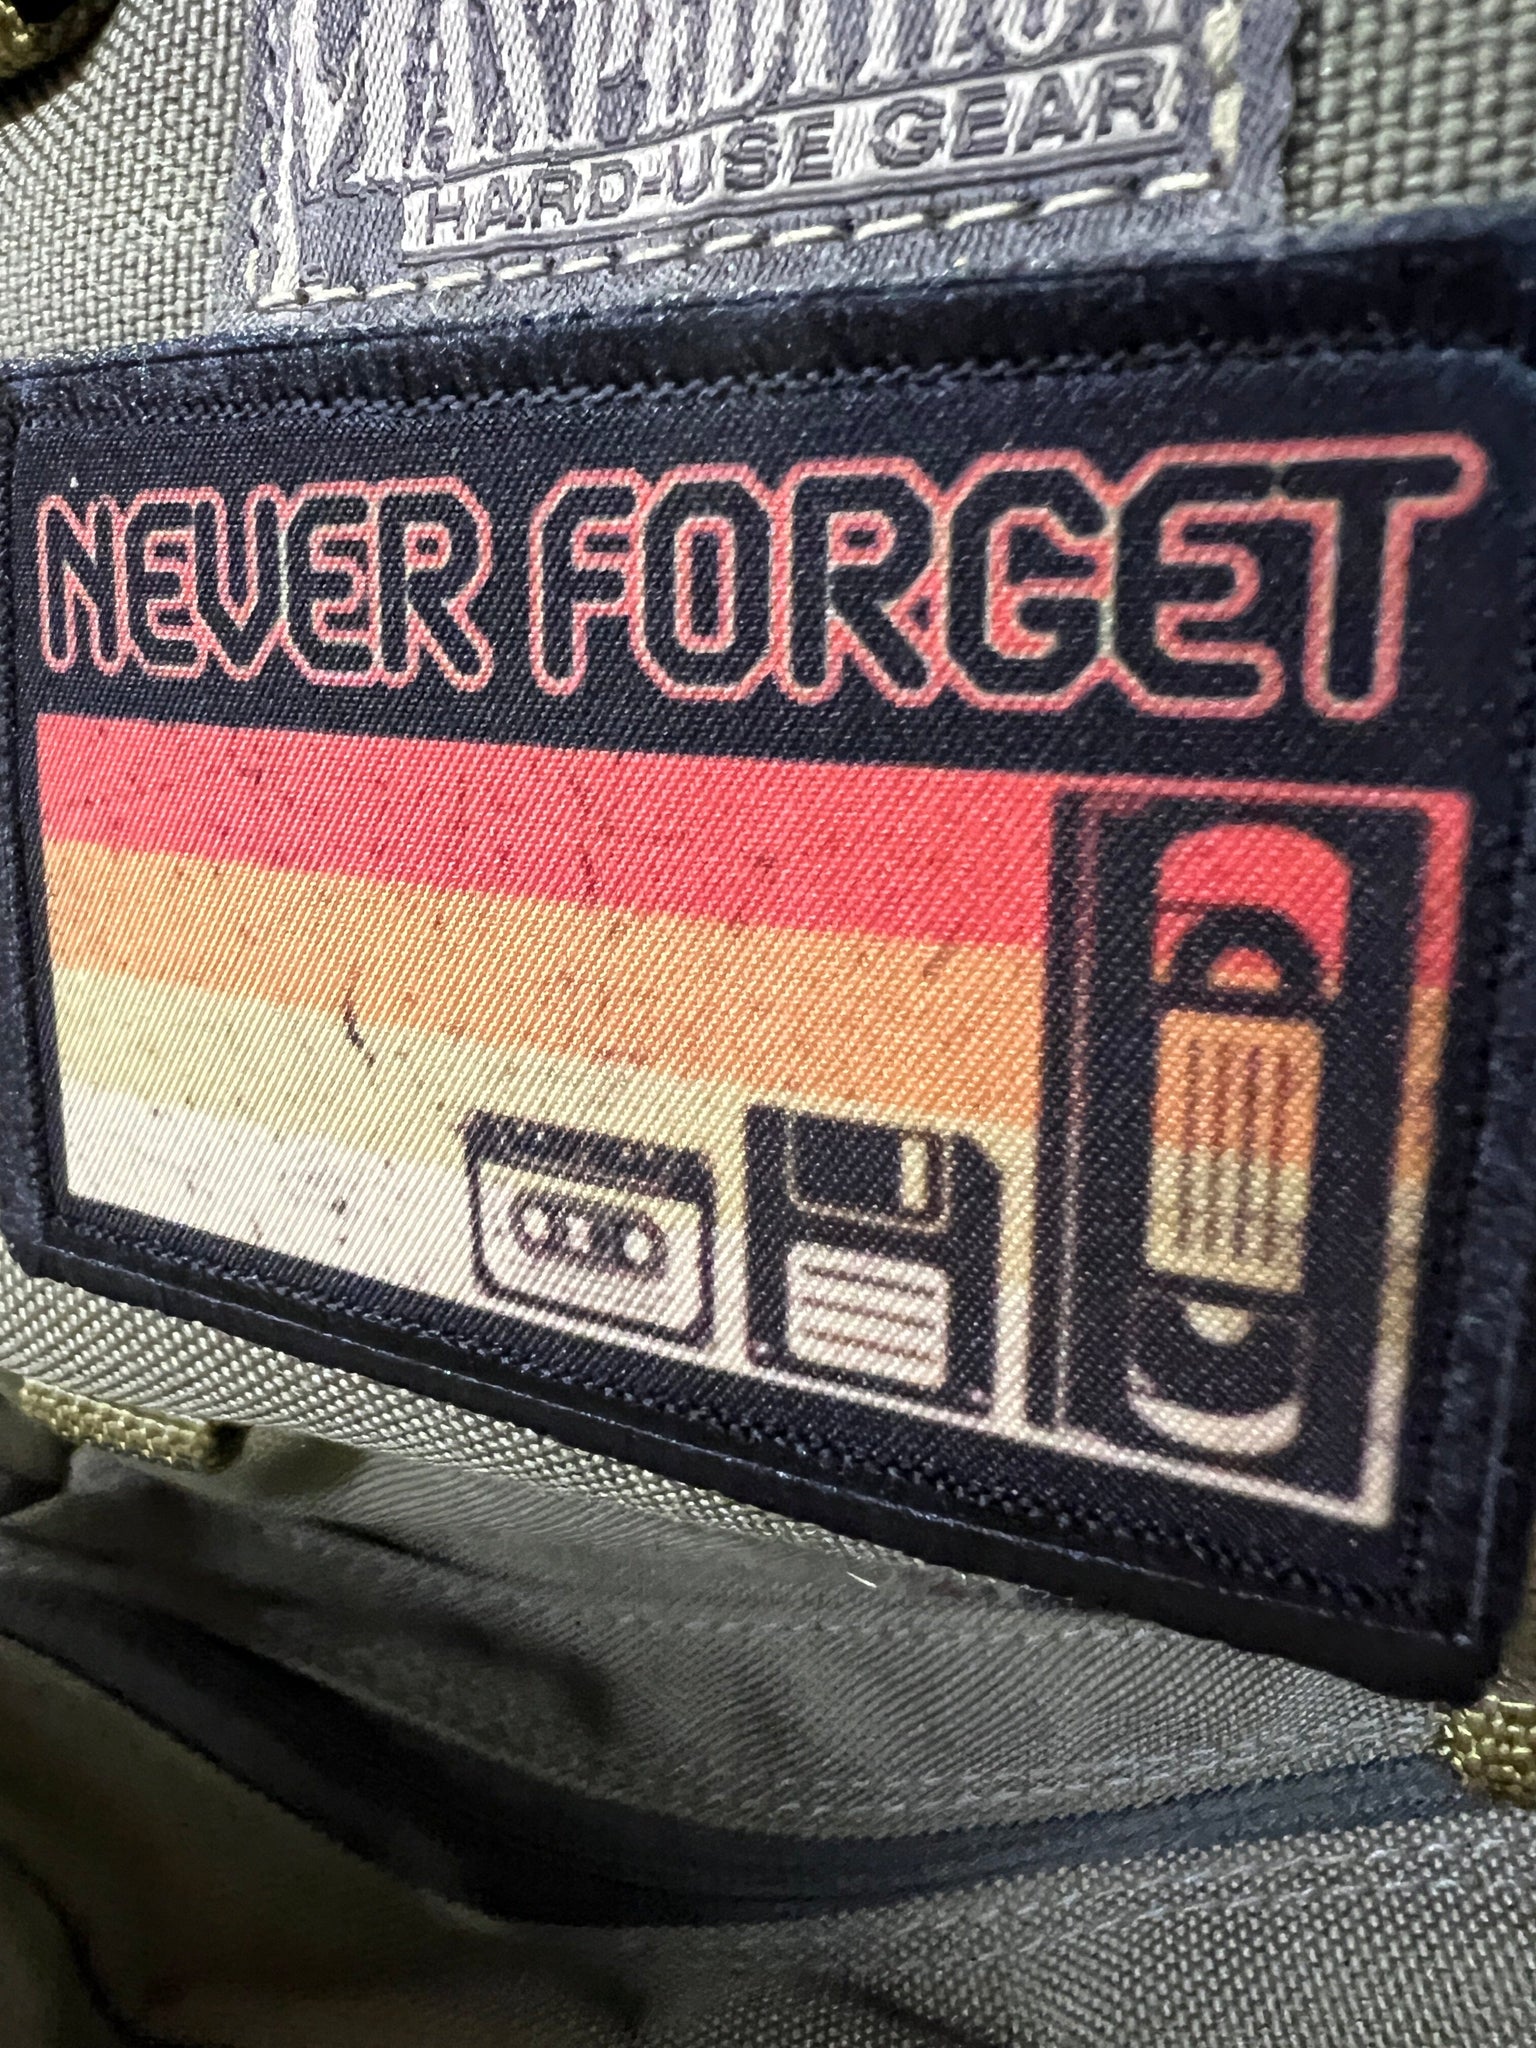 FLCL Never Knows Best Velcro Patch – Unlimited Patch Works